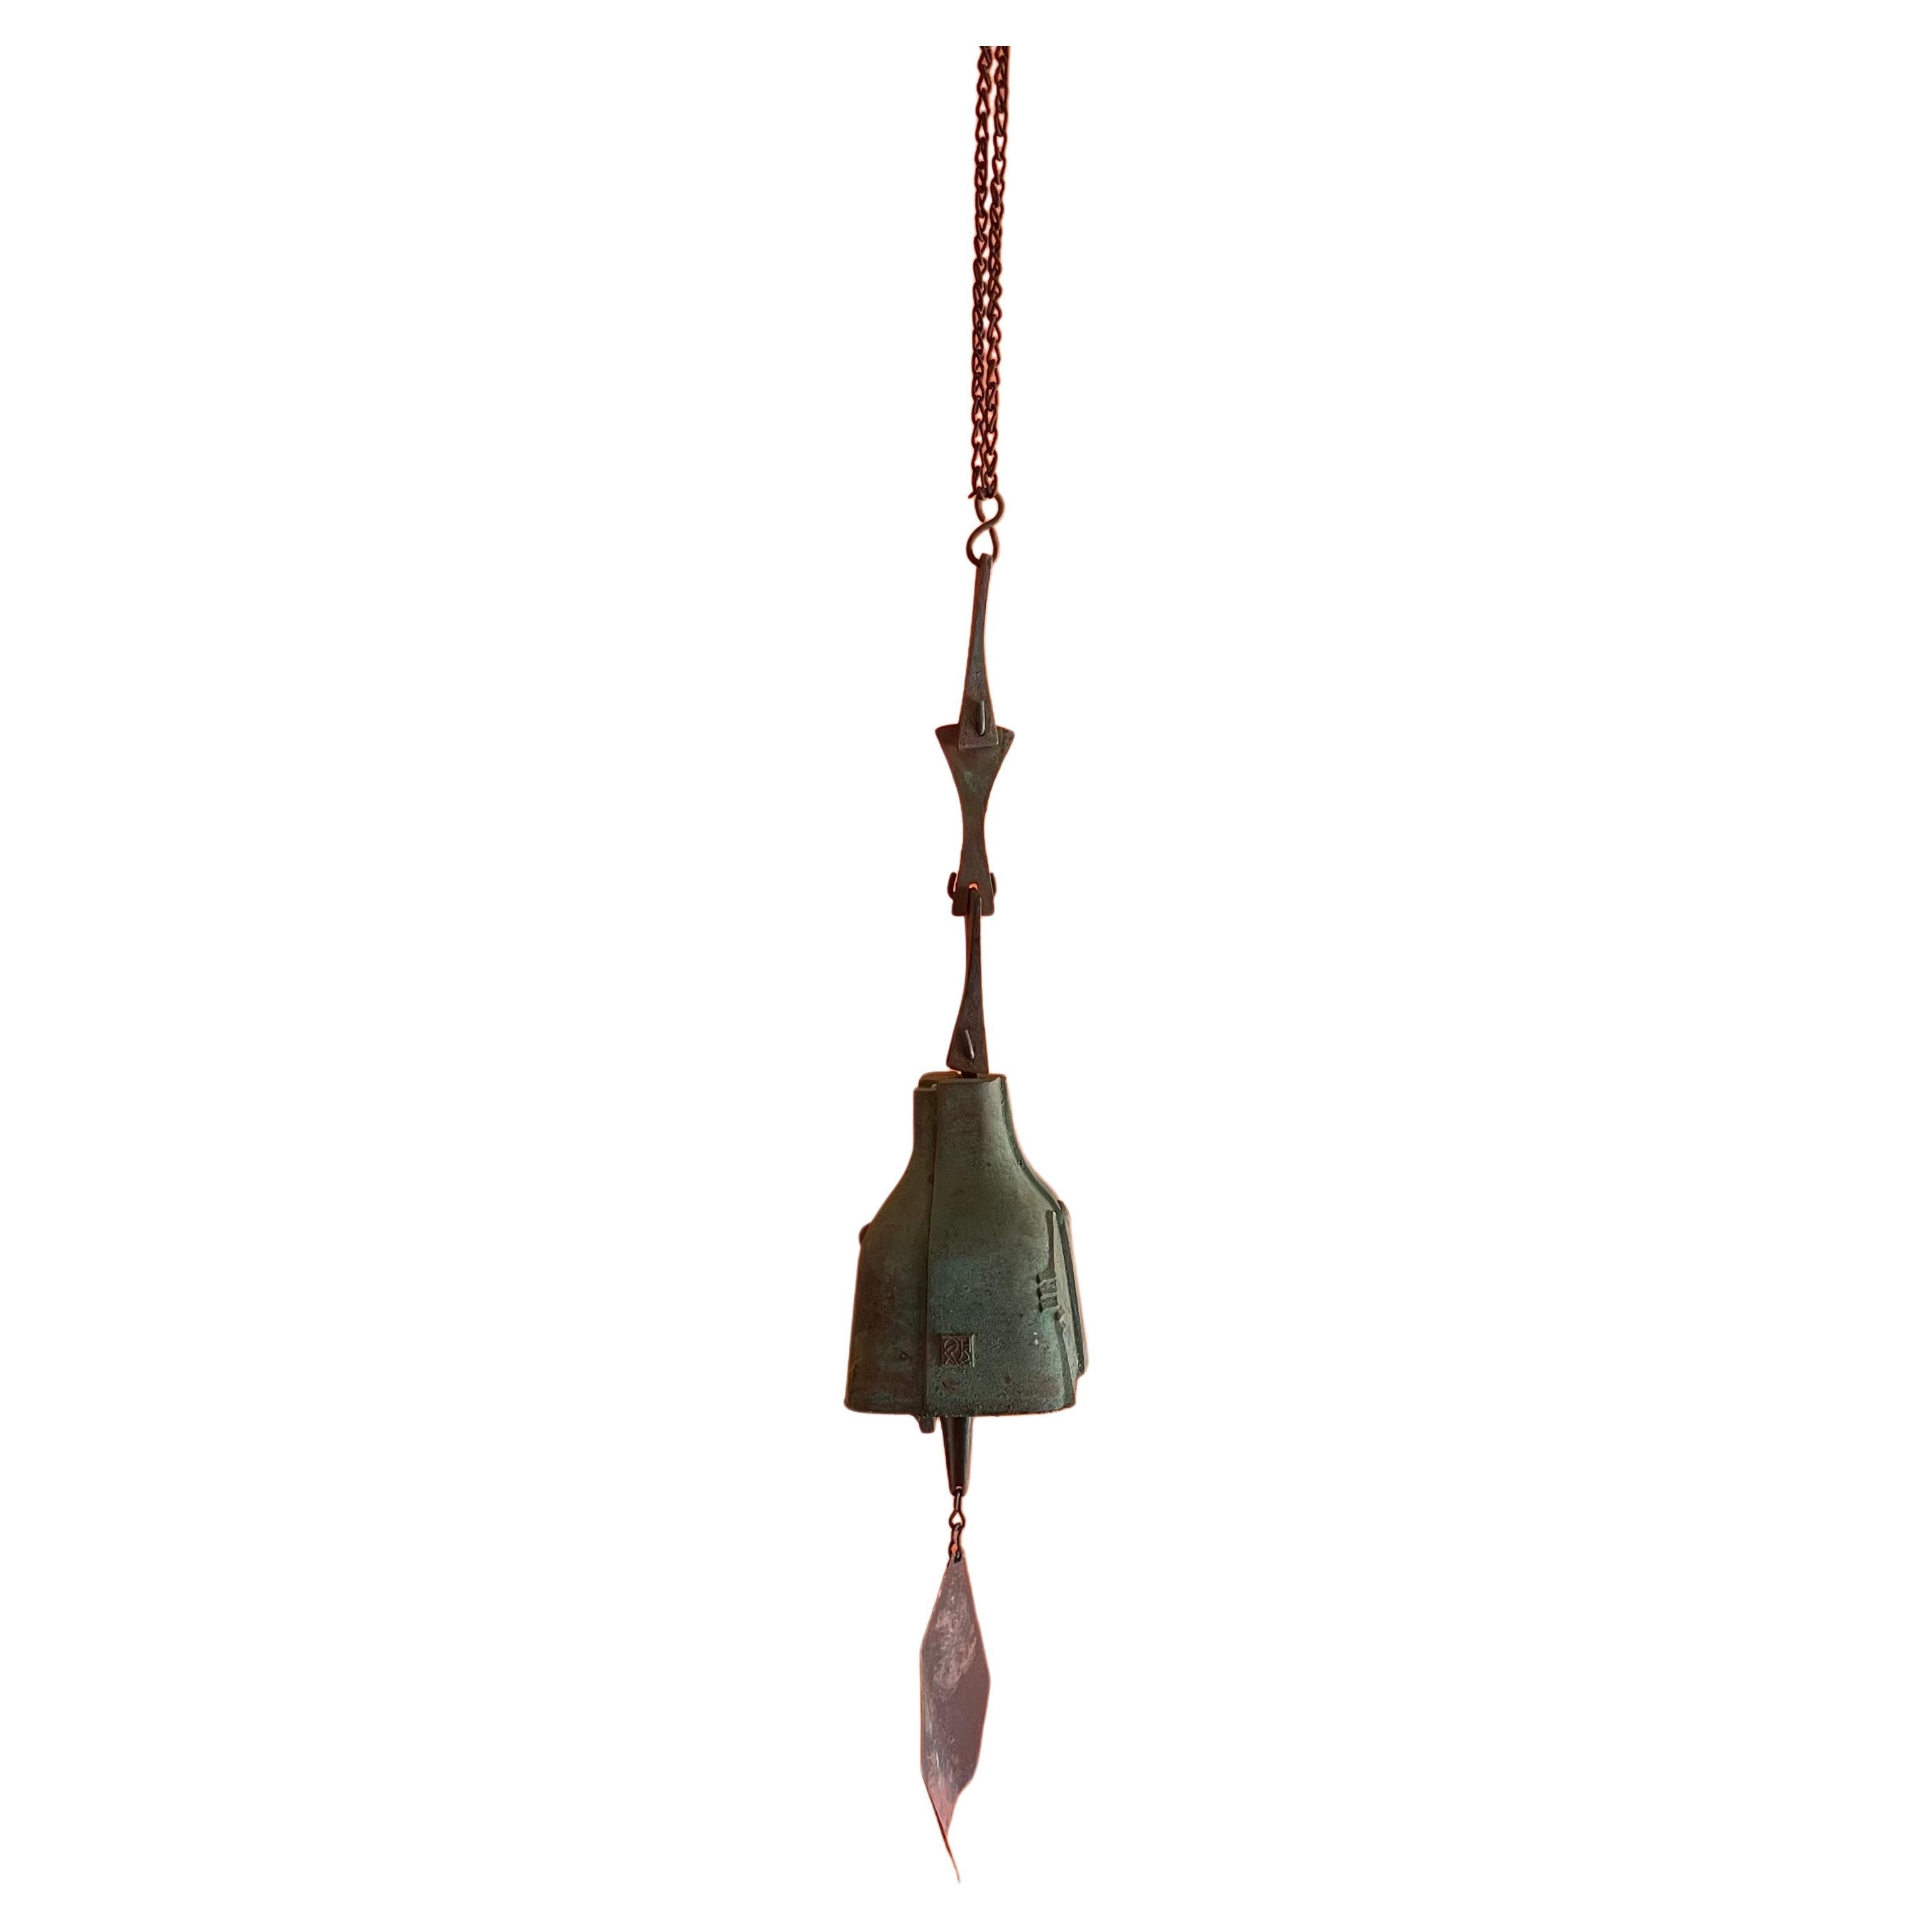 American Large Bronze Wind Chime / Bell by Paolo Soleri for Cosanti